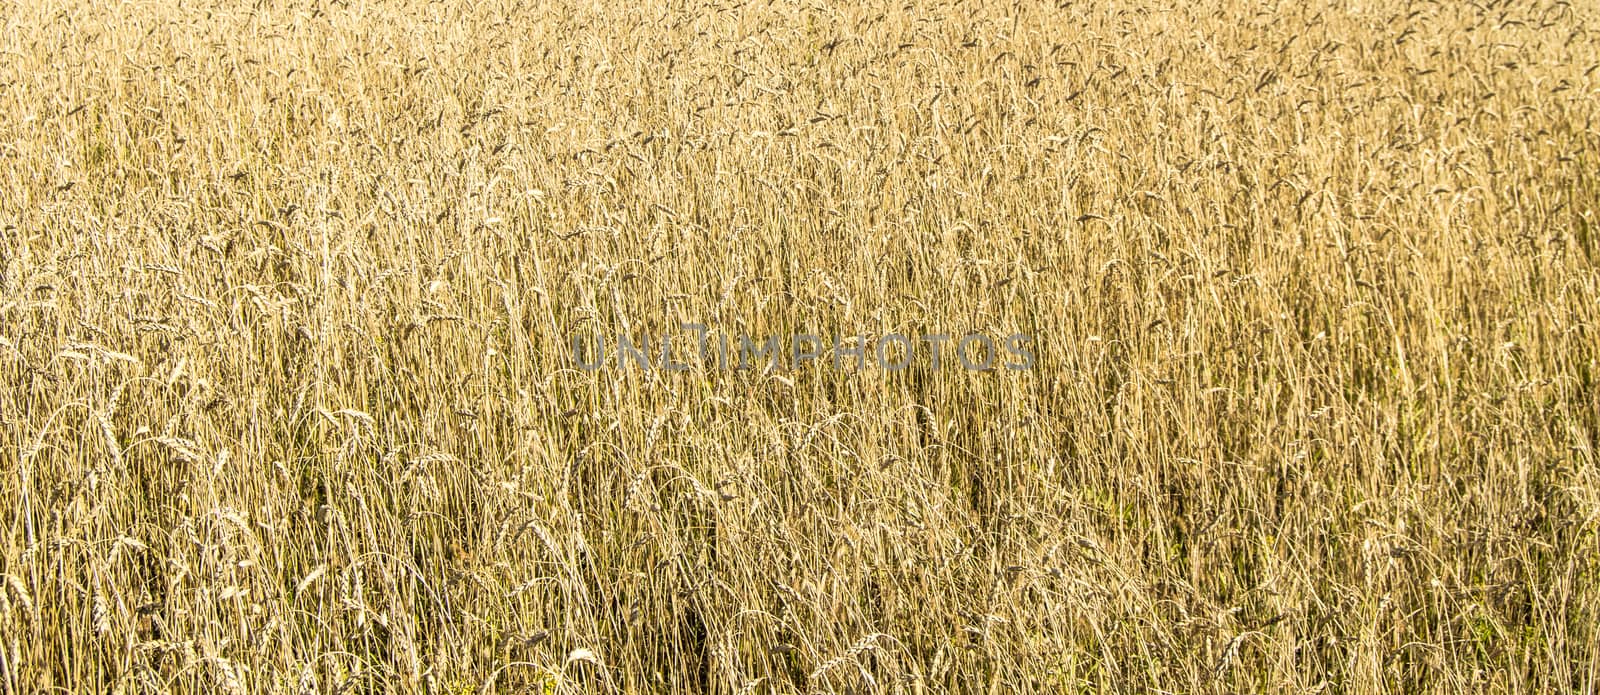 Wheat field with Golden ears. Rural landscape under bright sunlight. Background of the ripening ears of wheat field. The concept of a rich harvest.